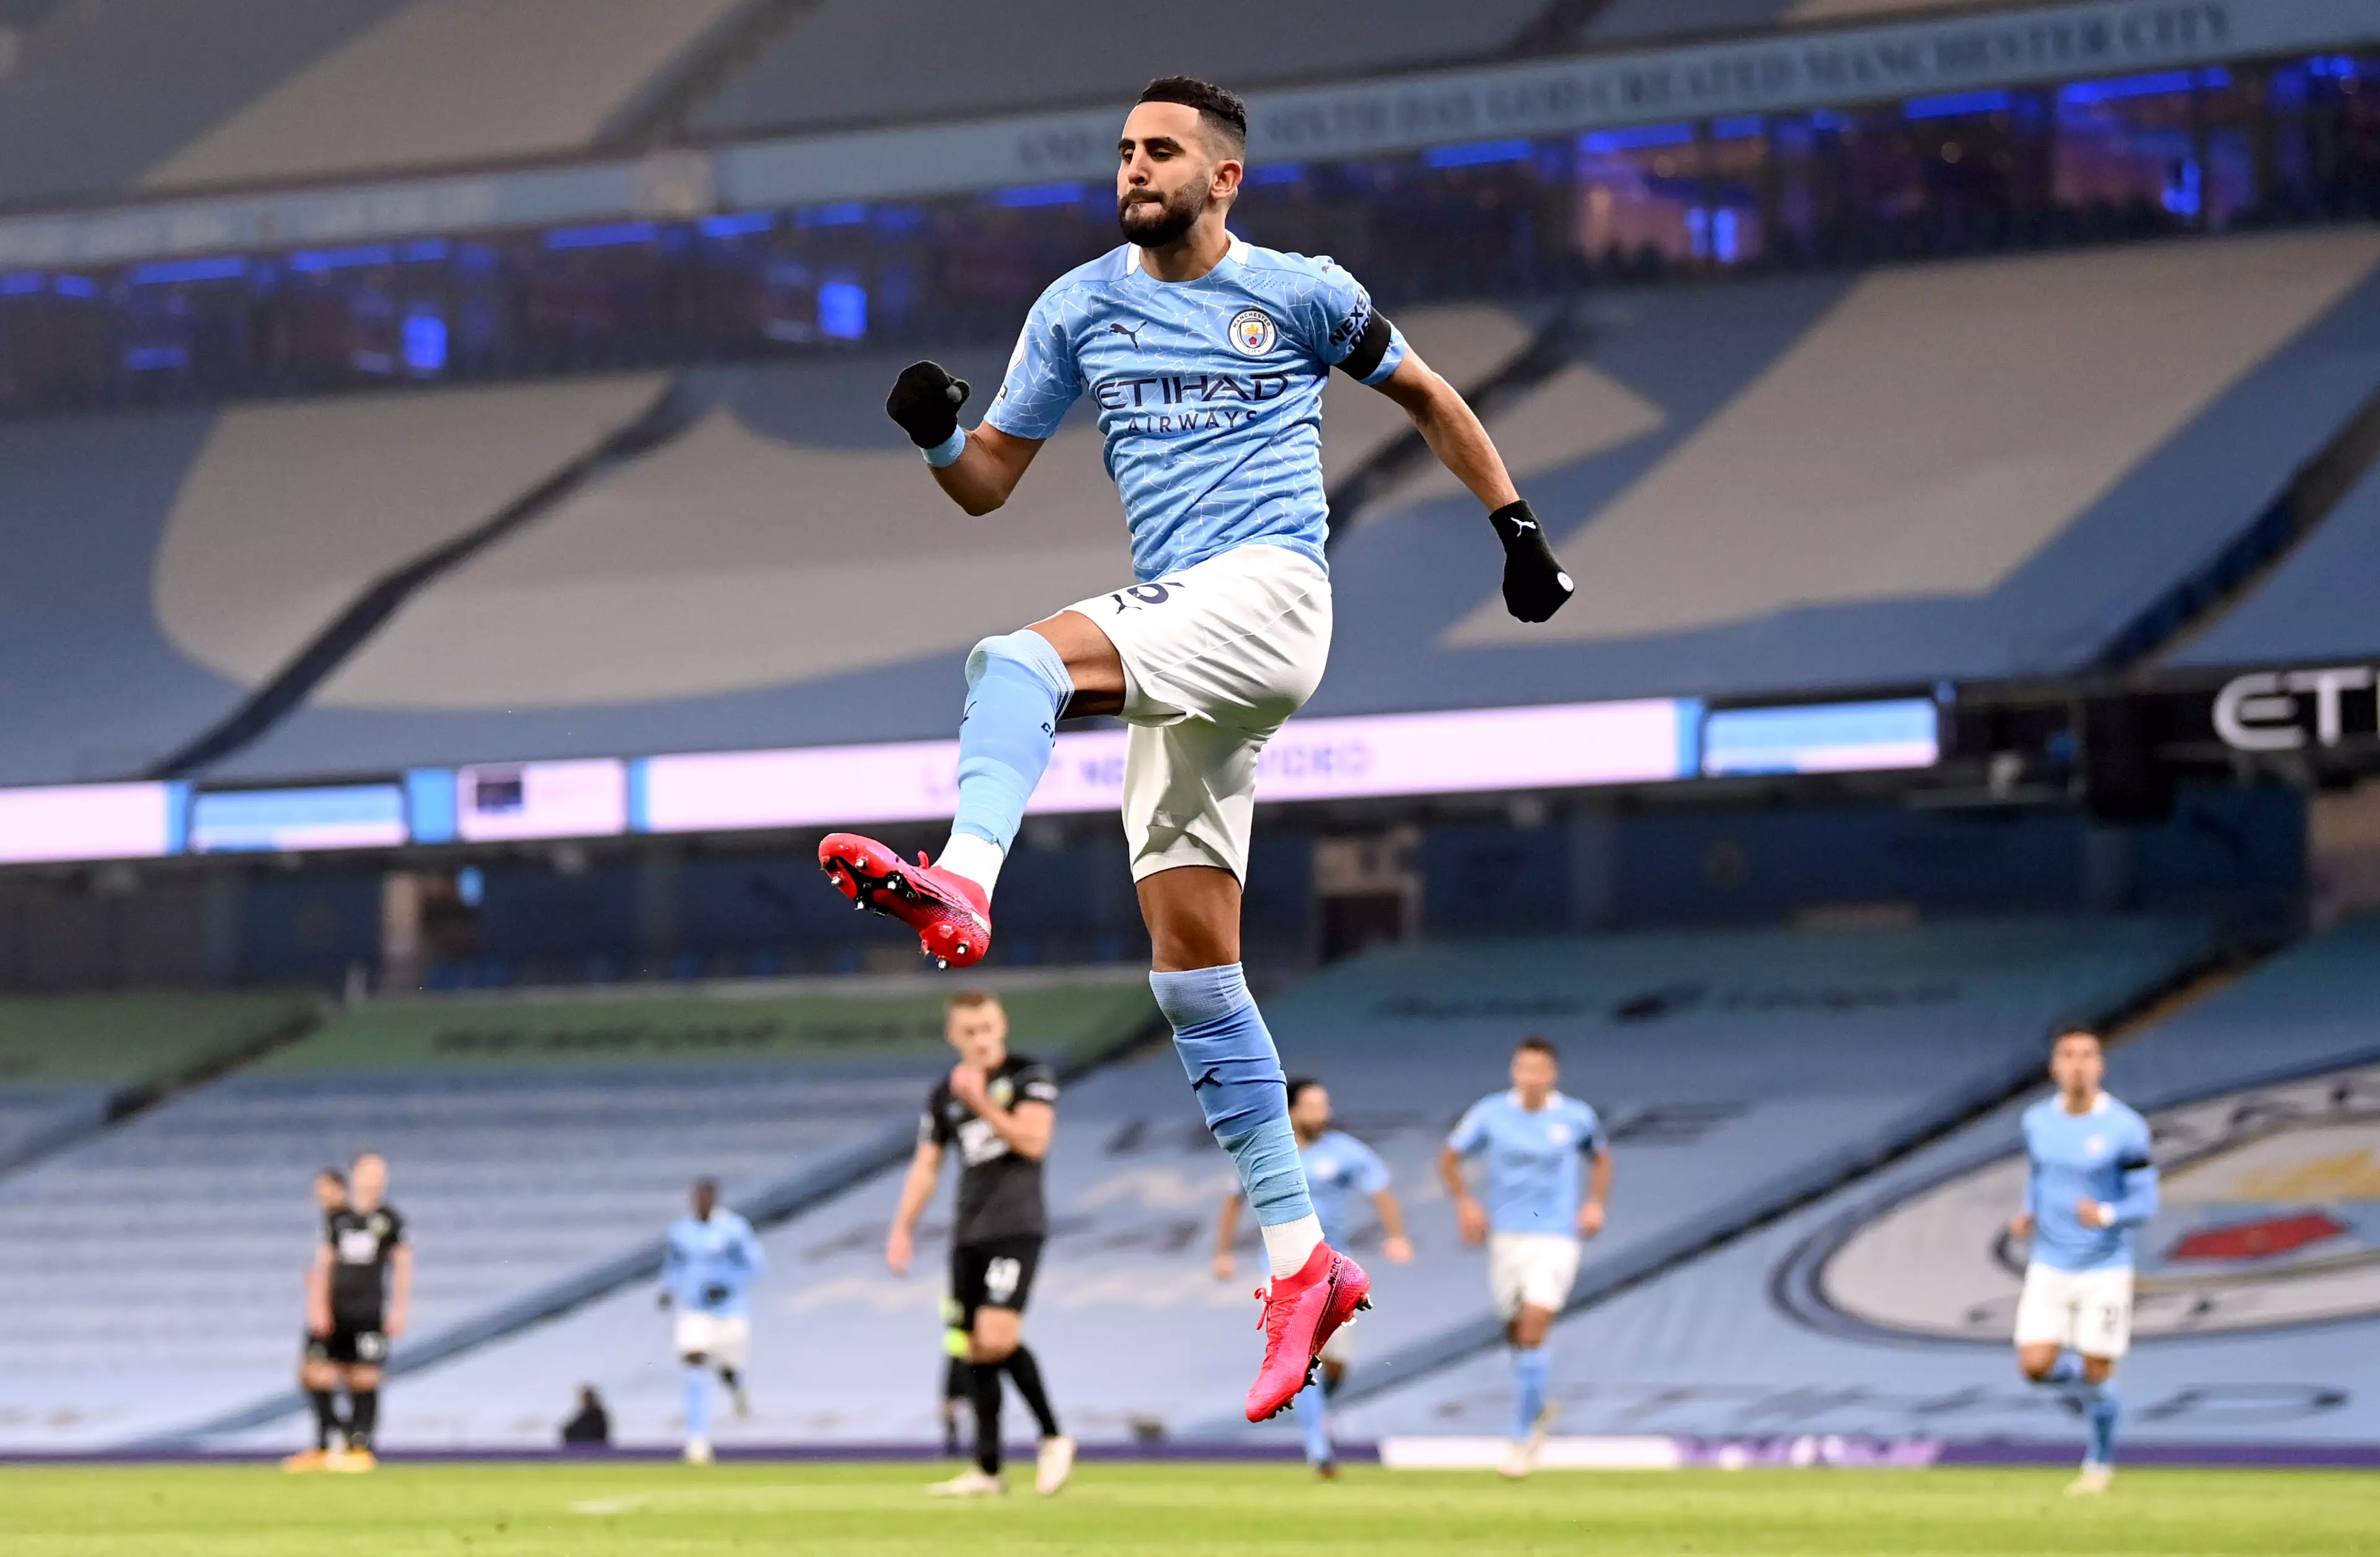 Riyad Mahrez should feature predominantly for City in their remaining league fixtures